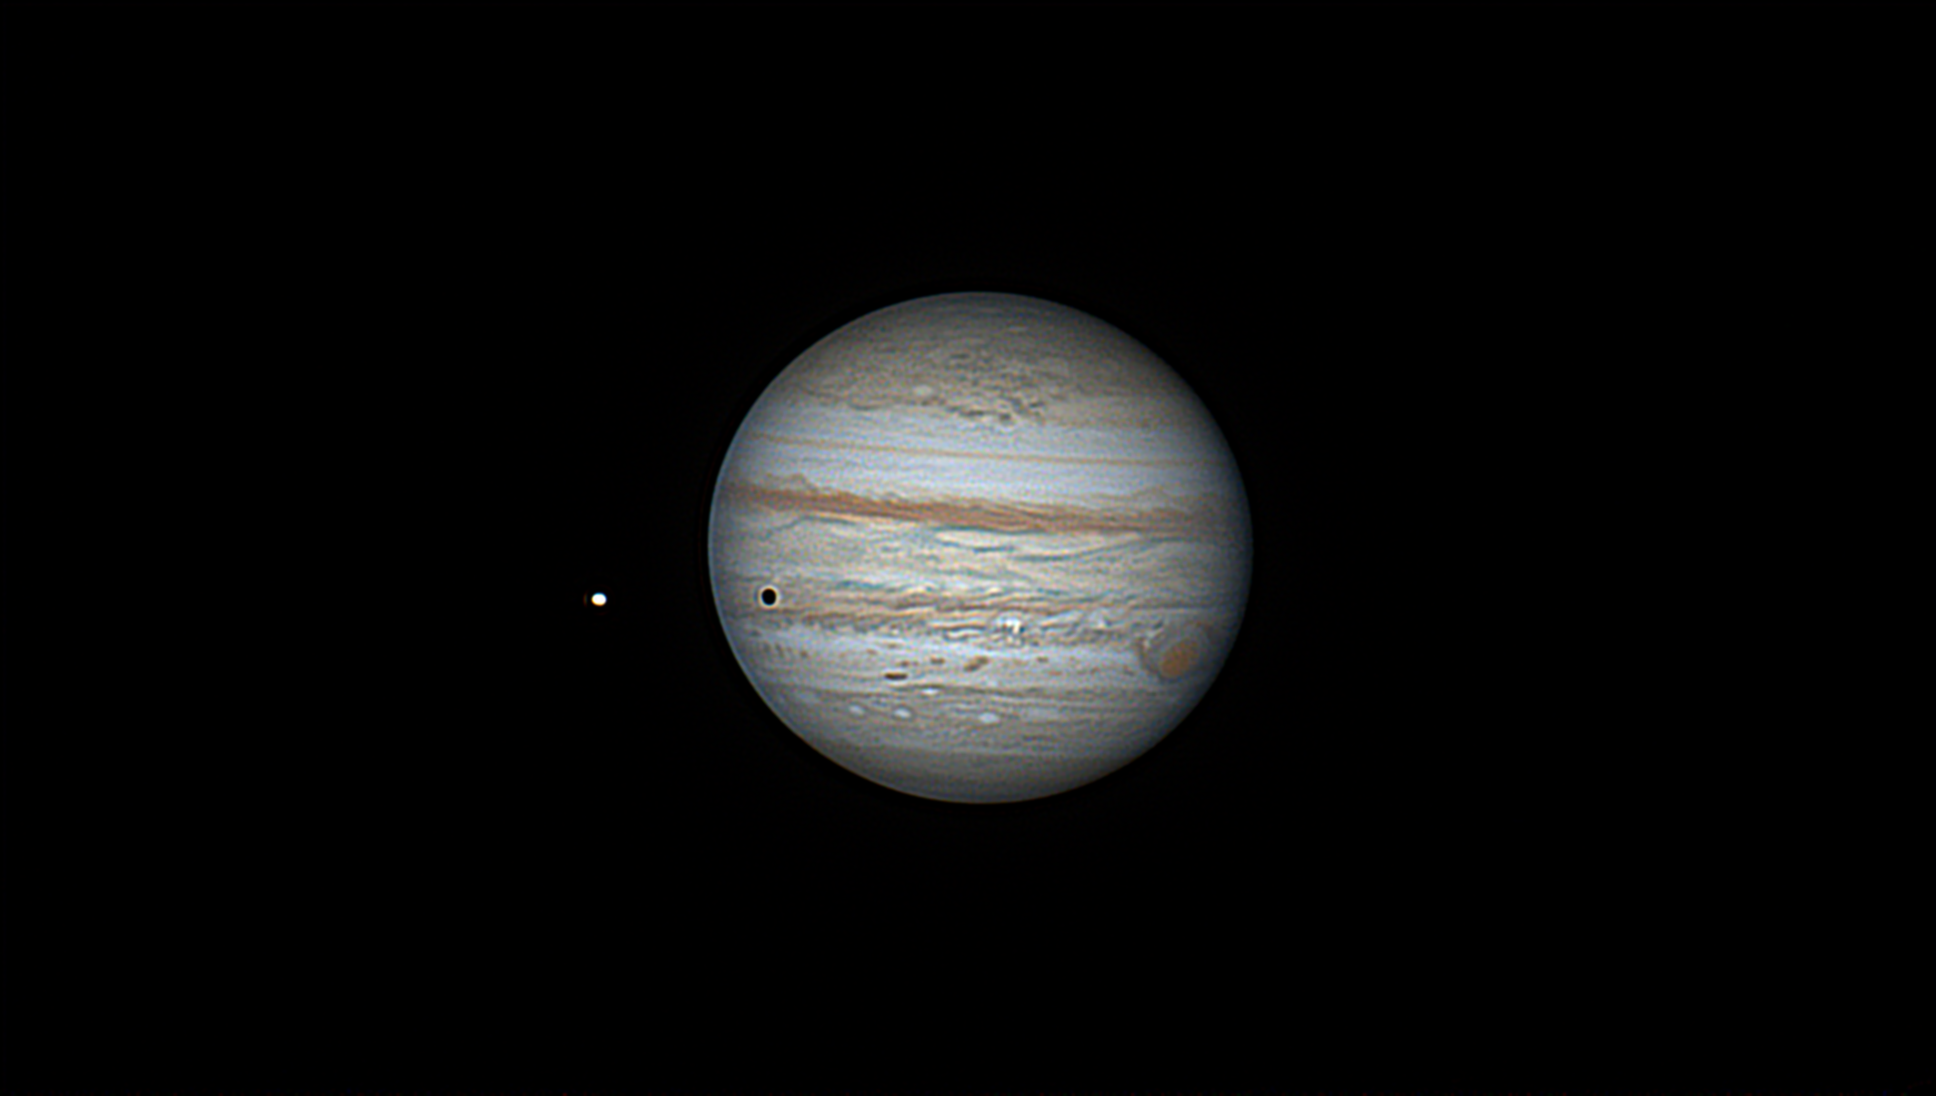 6307622b81f32_2022-08-25-0005_1-L-Jupiter_lapl5_ap447_conva.png.7f84ecab5396001fc3a9e97de16091a5.png